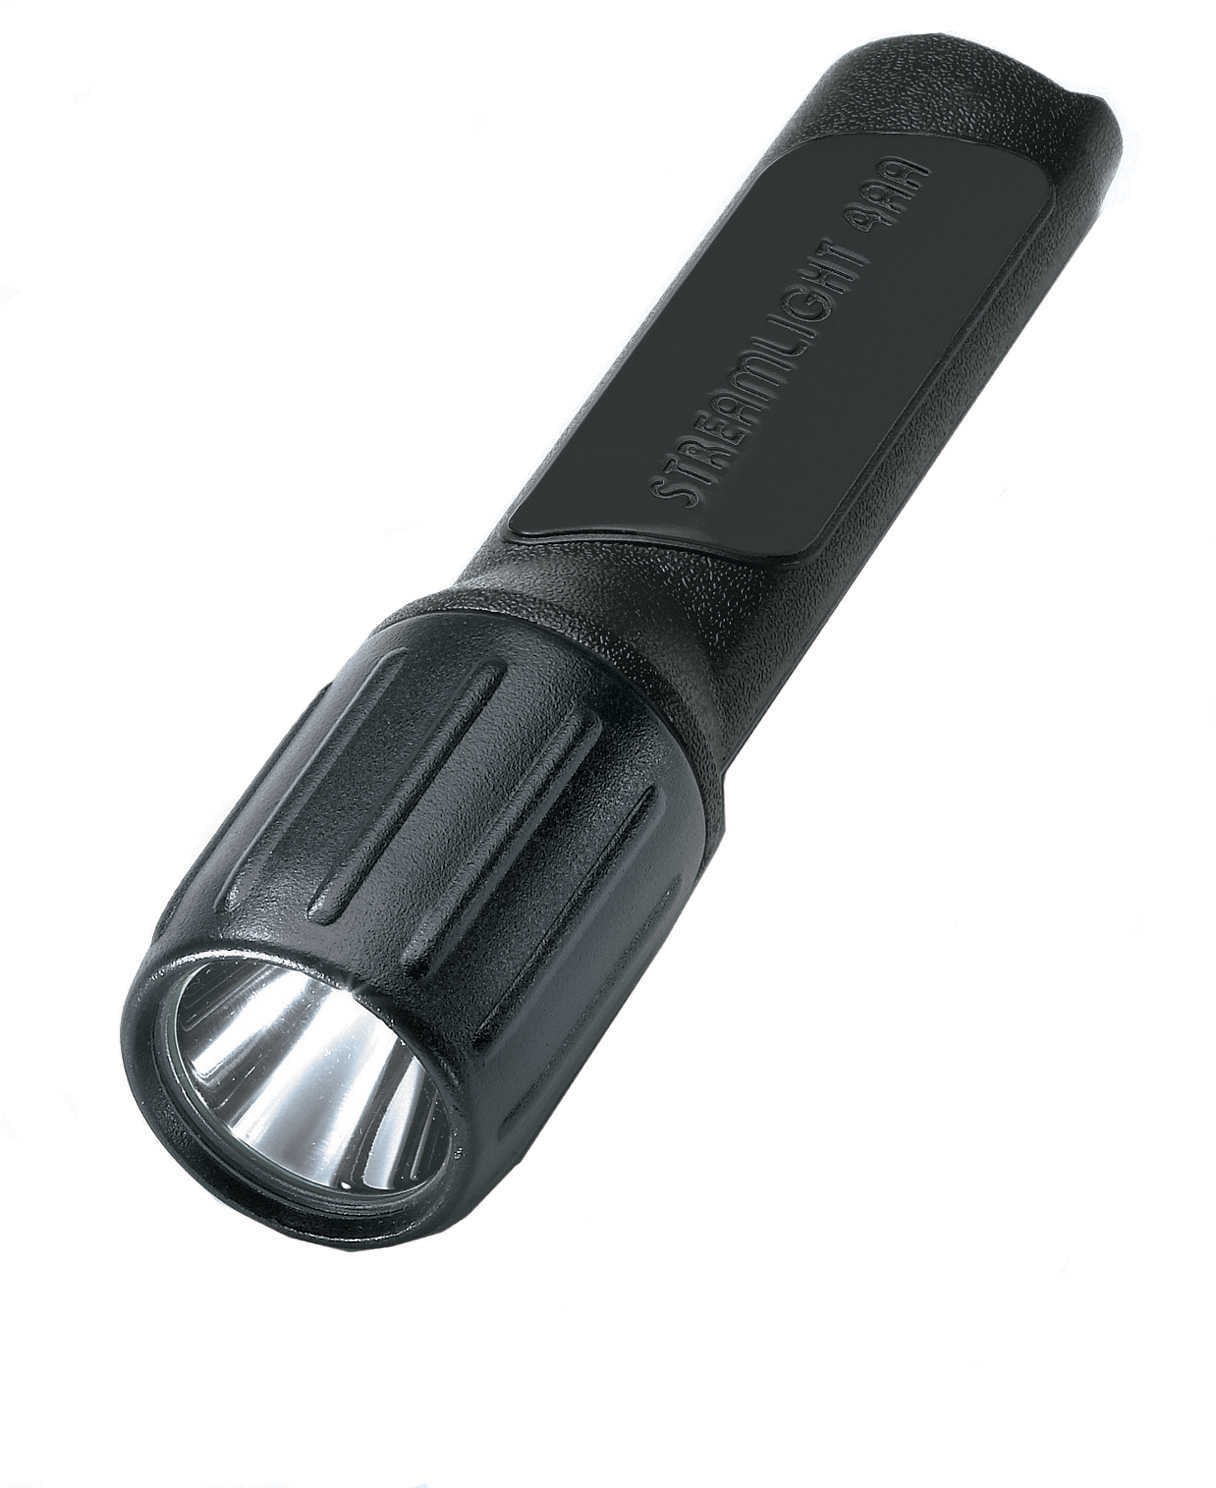 Streamlight 4AA Propolymer Luxeon - Black Super high-flux LED - Virtually indestructible, non-conductive polymer 68344